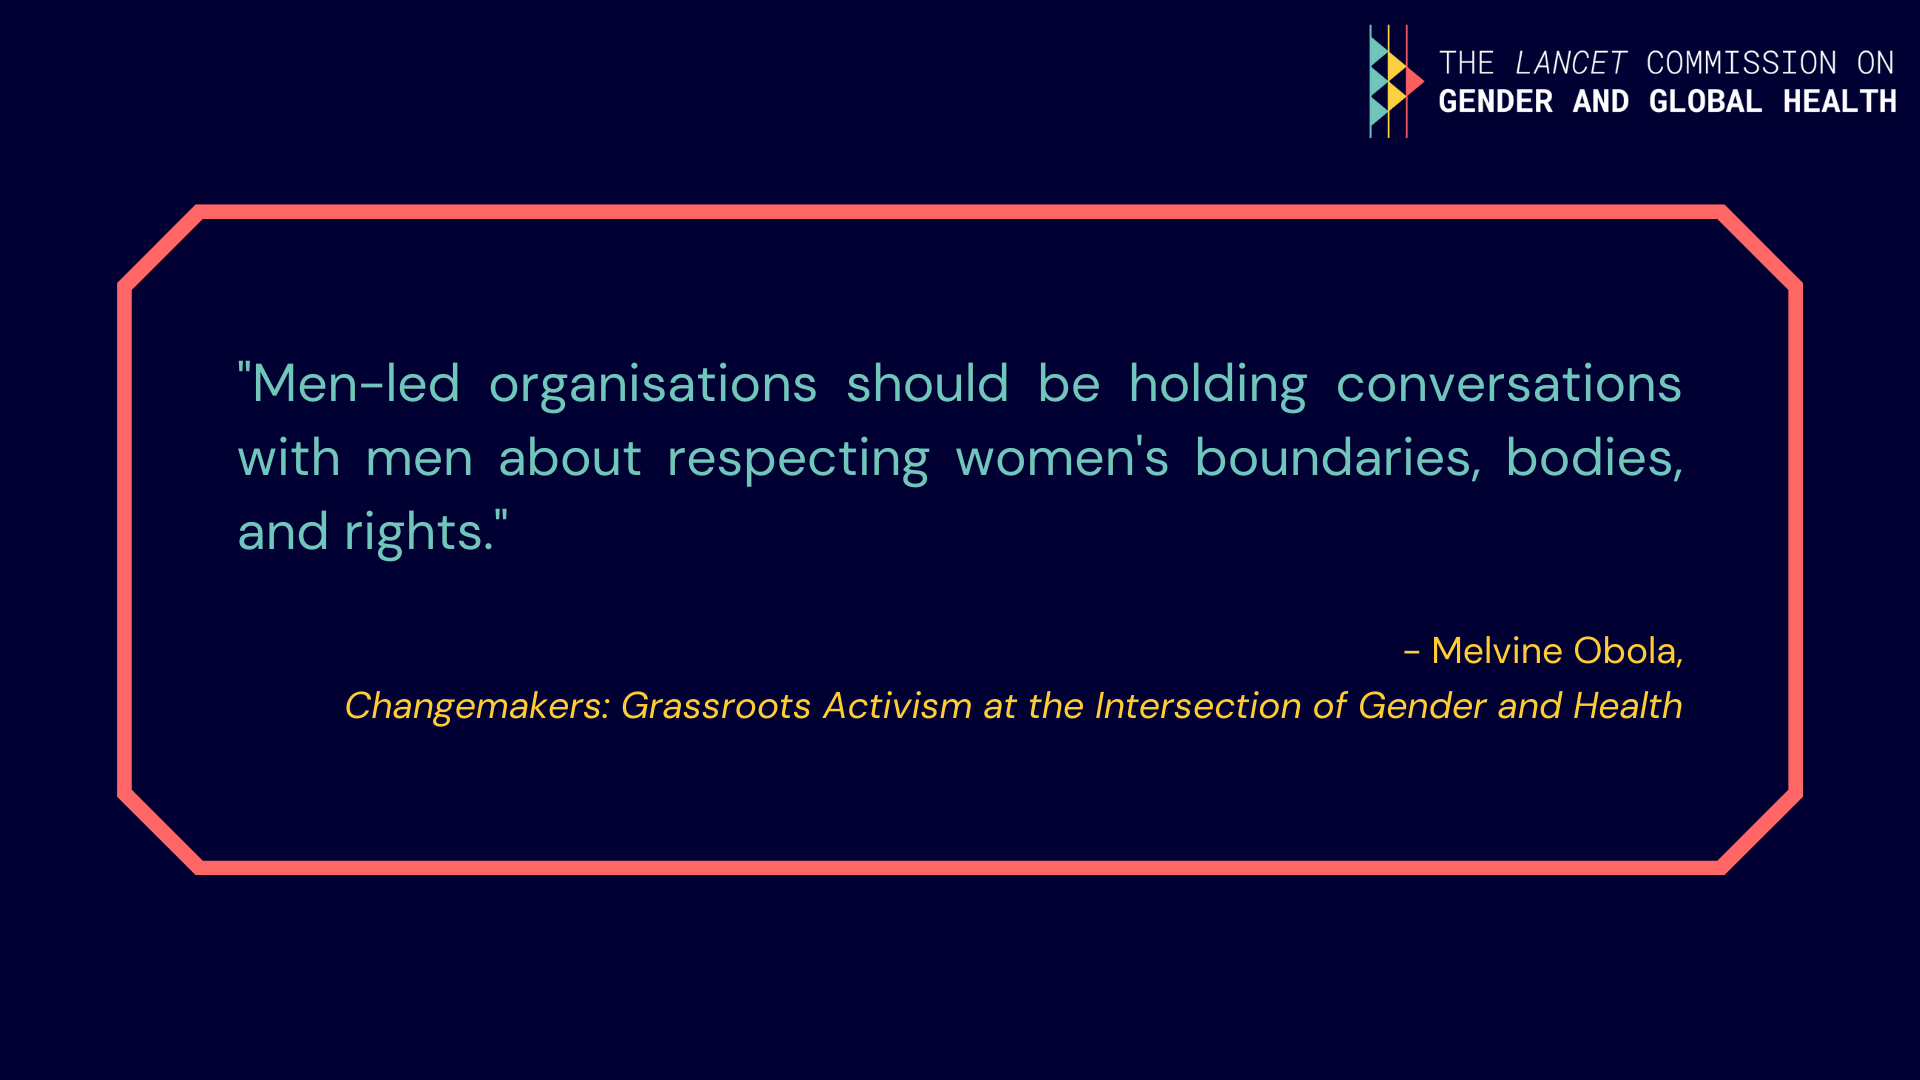 Quote from Melvine Obola: "Men-led organisations should be holding conversations with men about respecting women's bodies, boundaries, and rights".